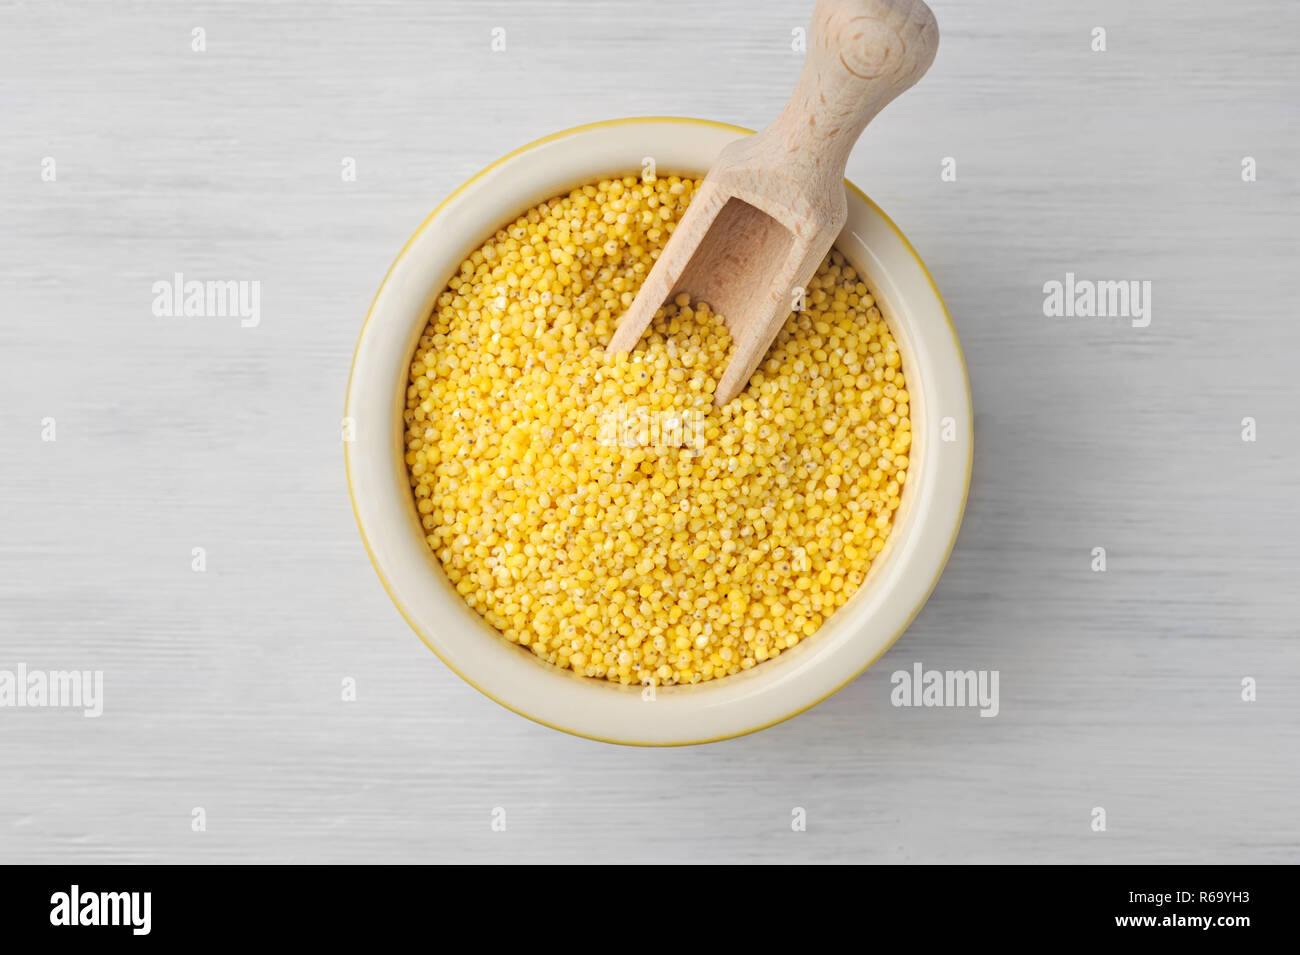 Organic millet seeds in a ceramic bowl on wooden white rustic table.Supergrain with its mildly sweet flavor, is tasty, soothing, non-acid forming, and Stock Photo